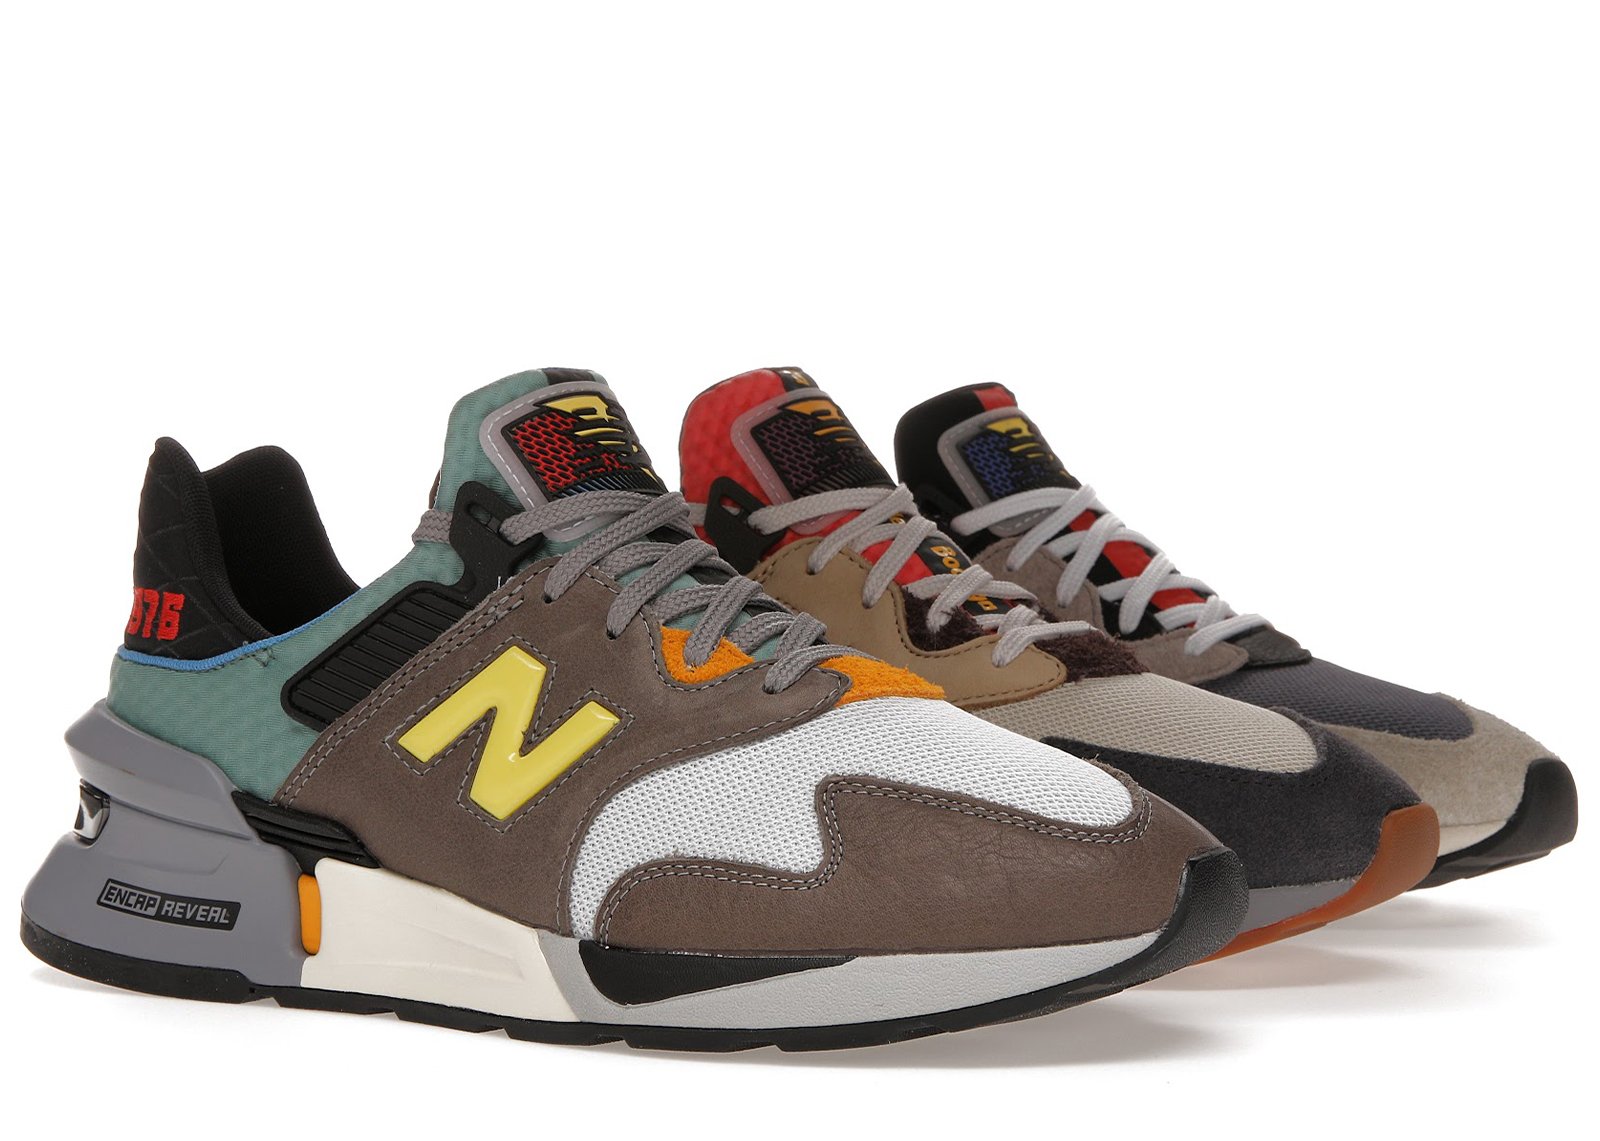 New Balance 997S Bodega Trilogy Pack sneakers